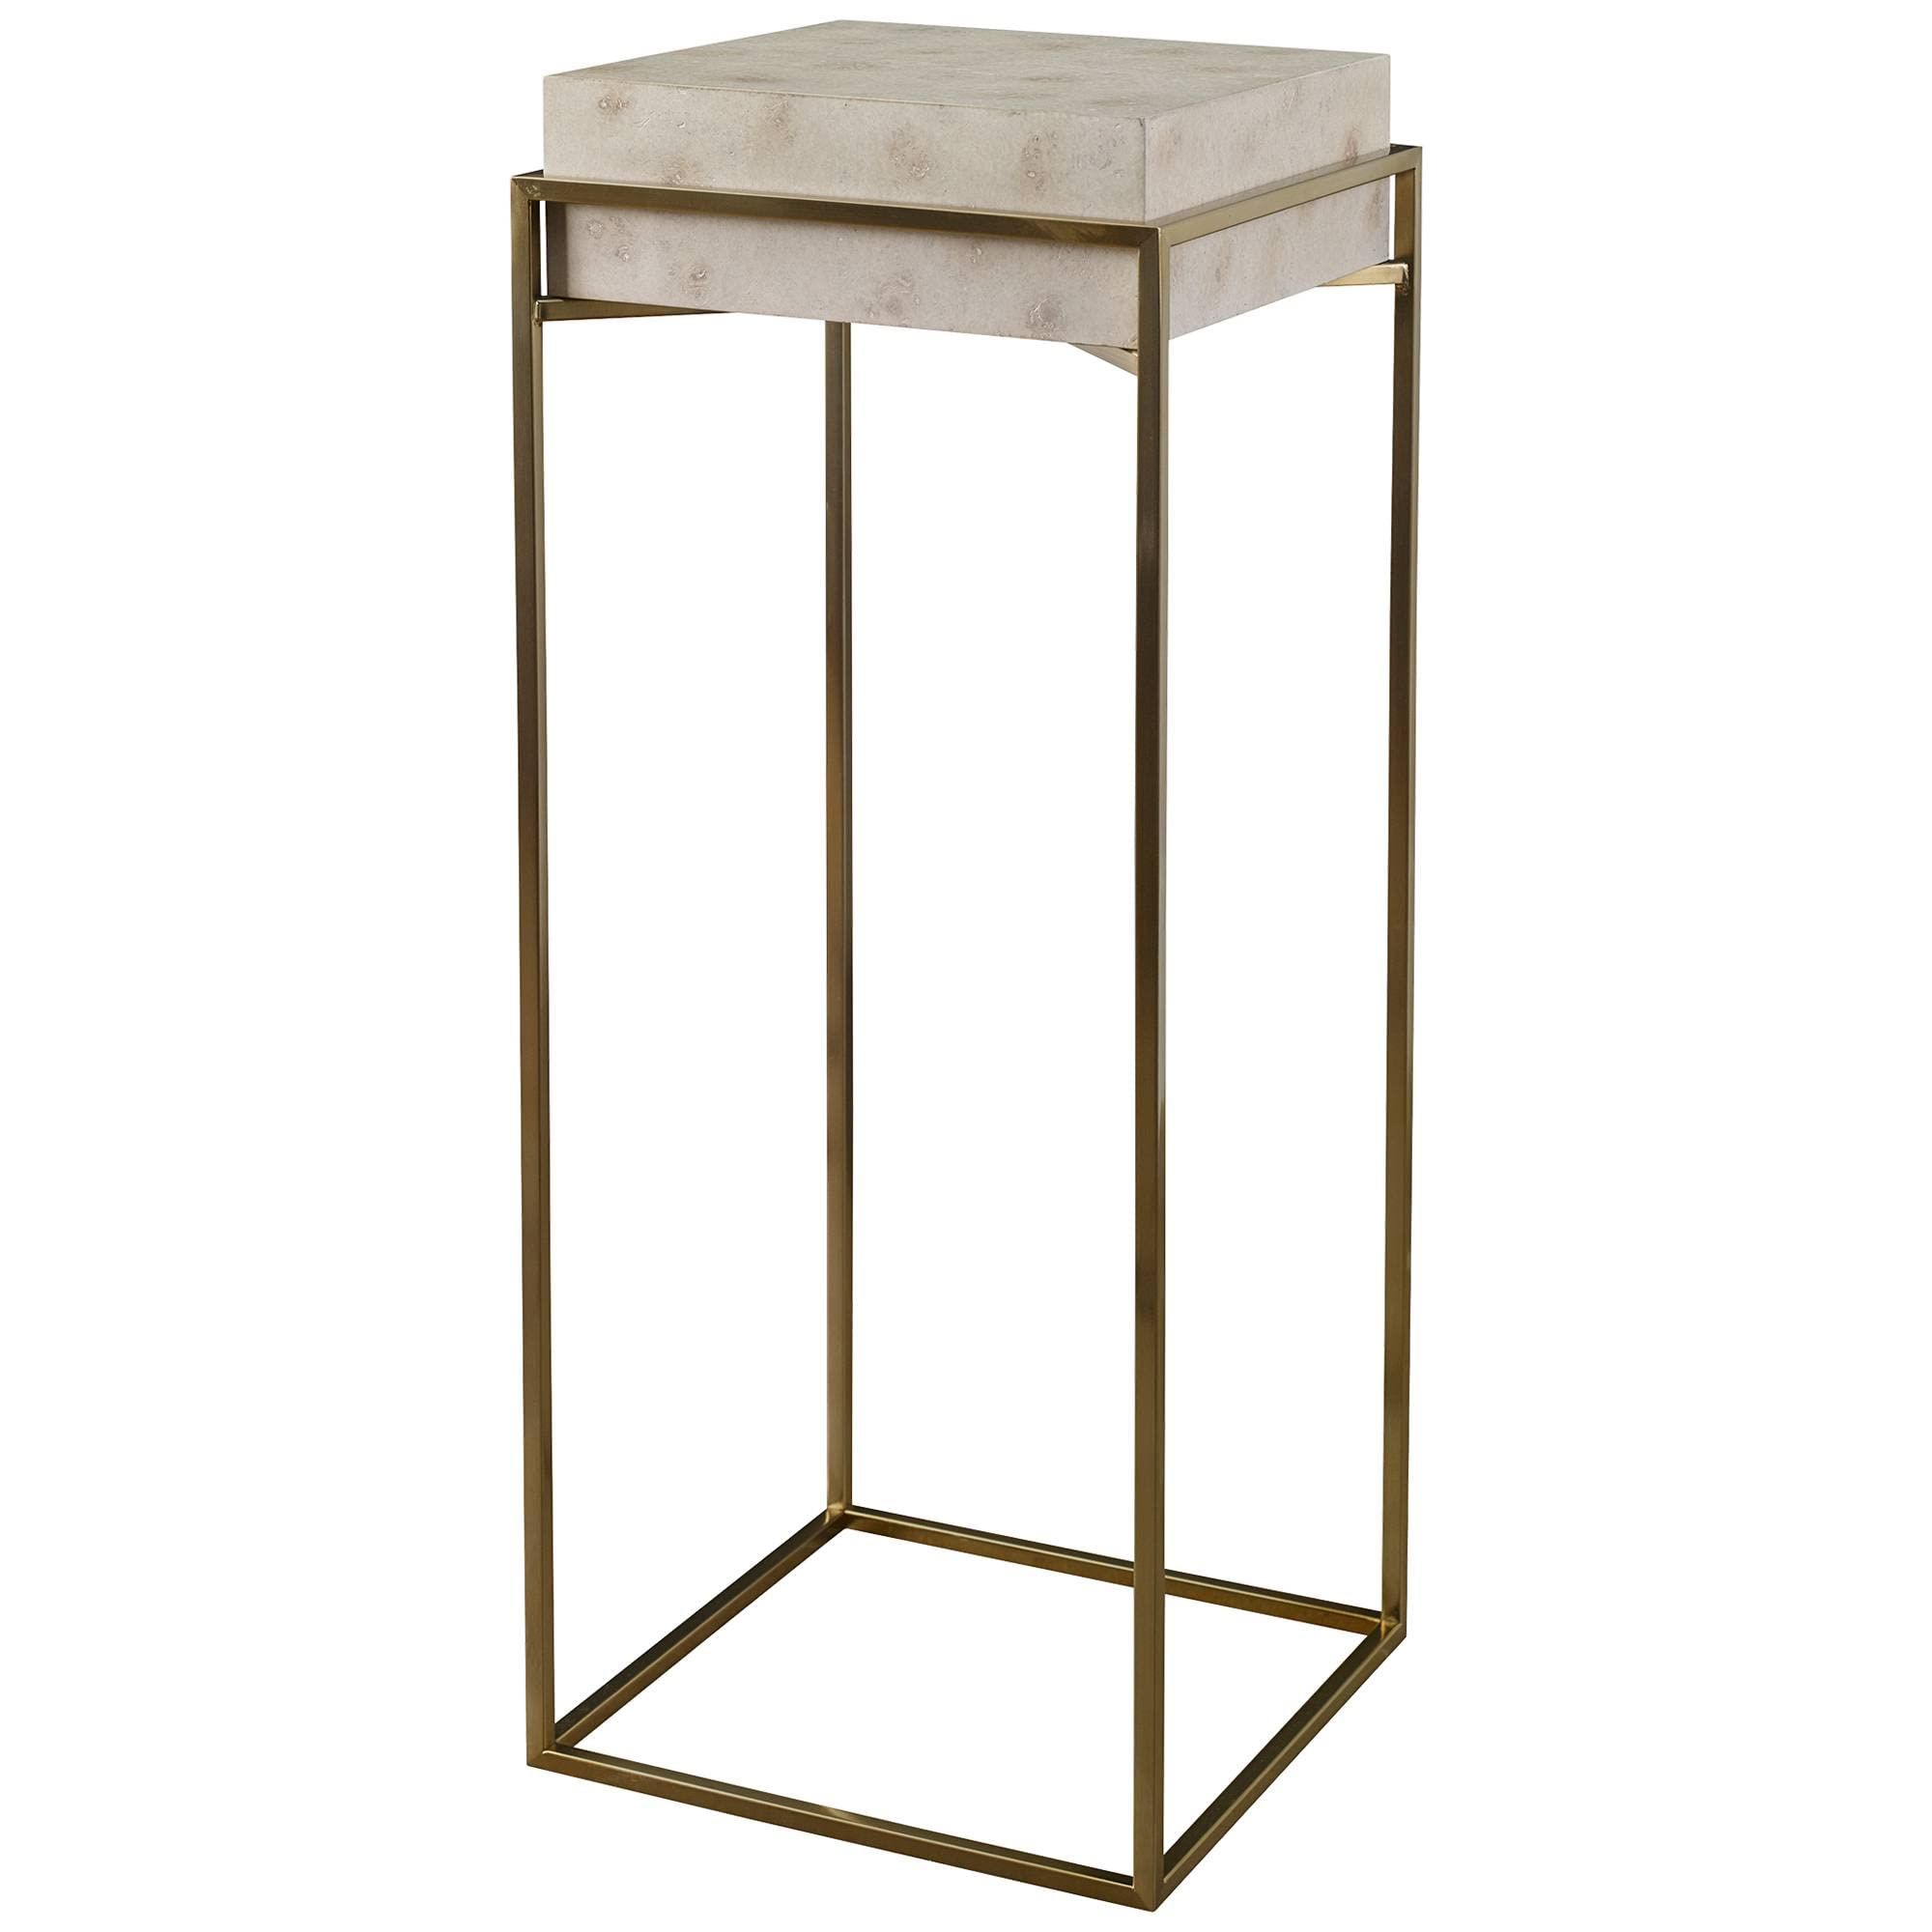 Ivory Plant Stands Intended For 2018 Amazon: Uttermost Inda 36" High Ivory And Brass Modern Plant Stand :  Patio, Lawn & Garden (View 9 of 10)